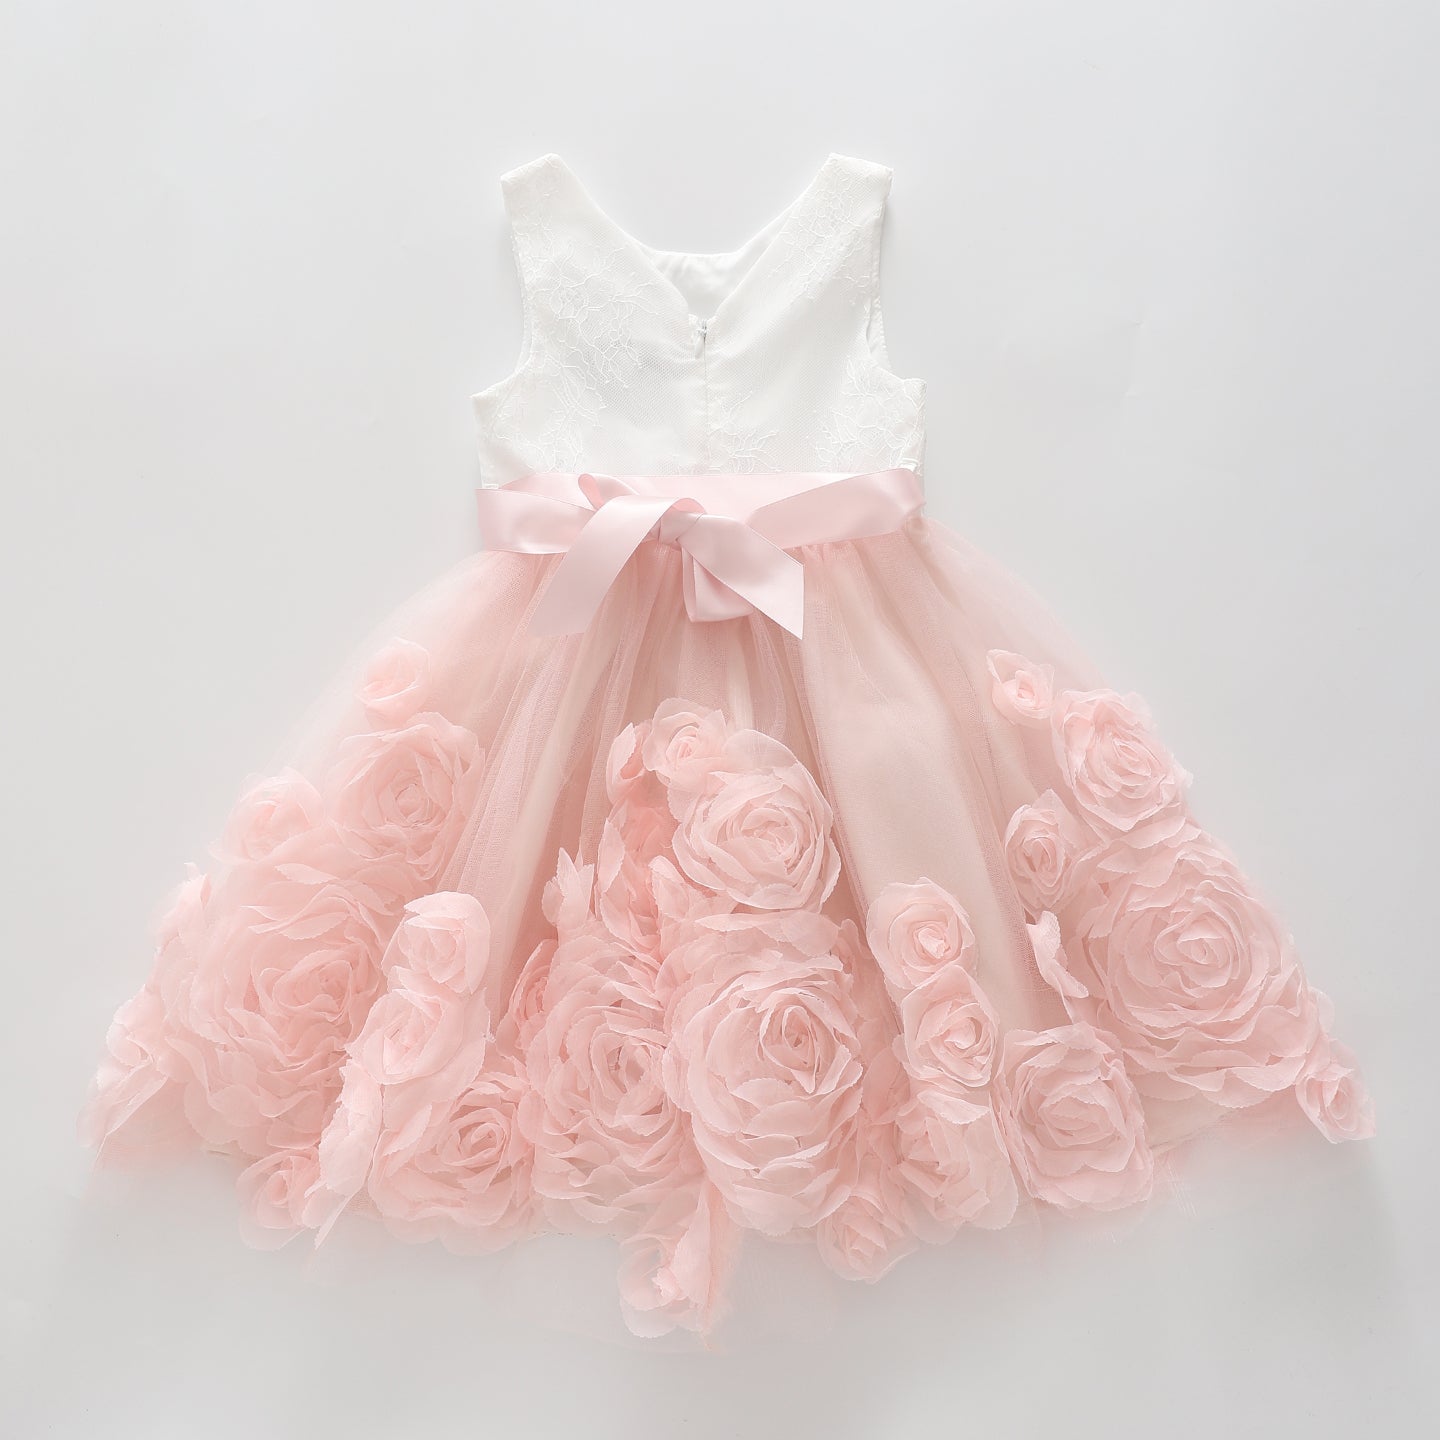 Girl's White and Pink Lace Rosette Party Dress